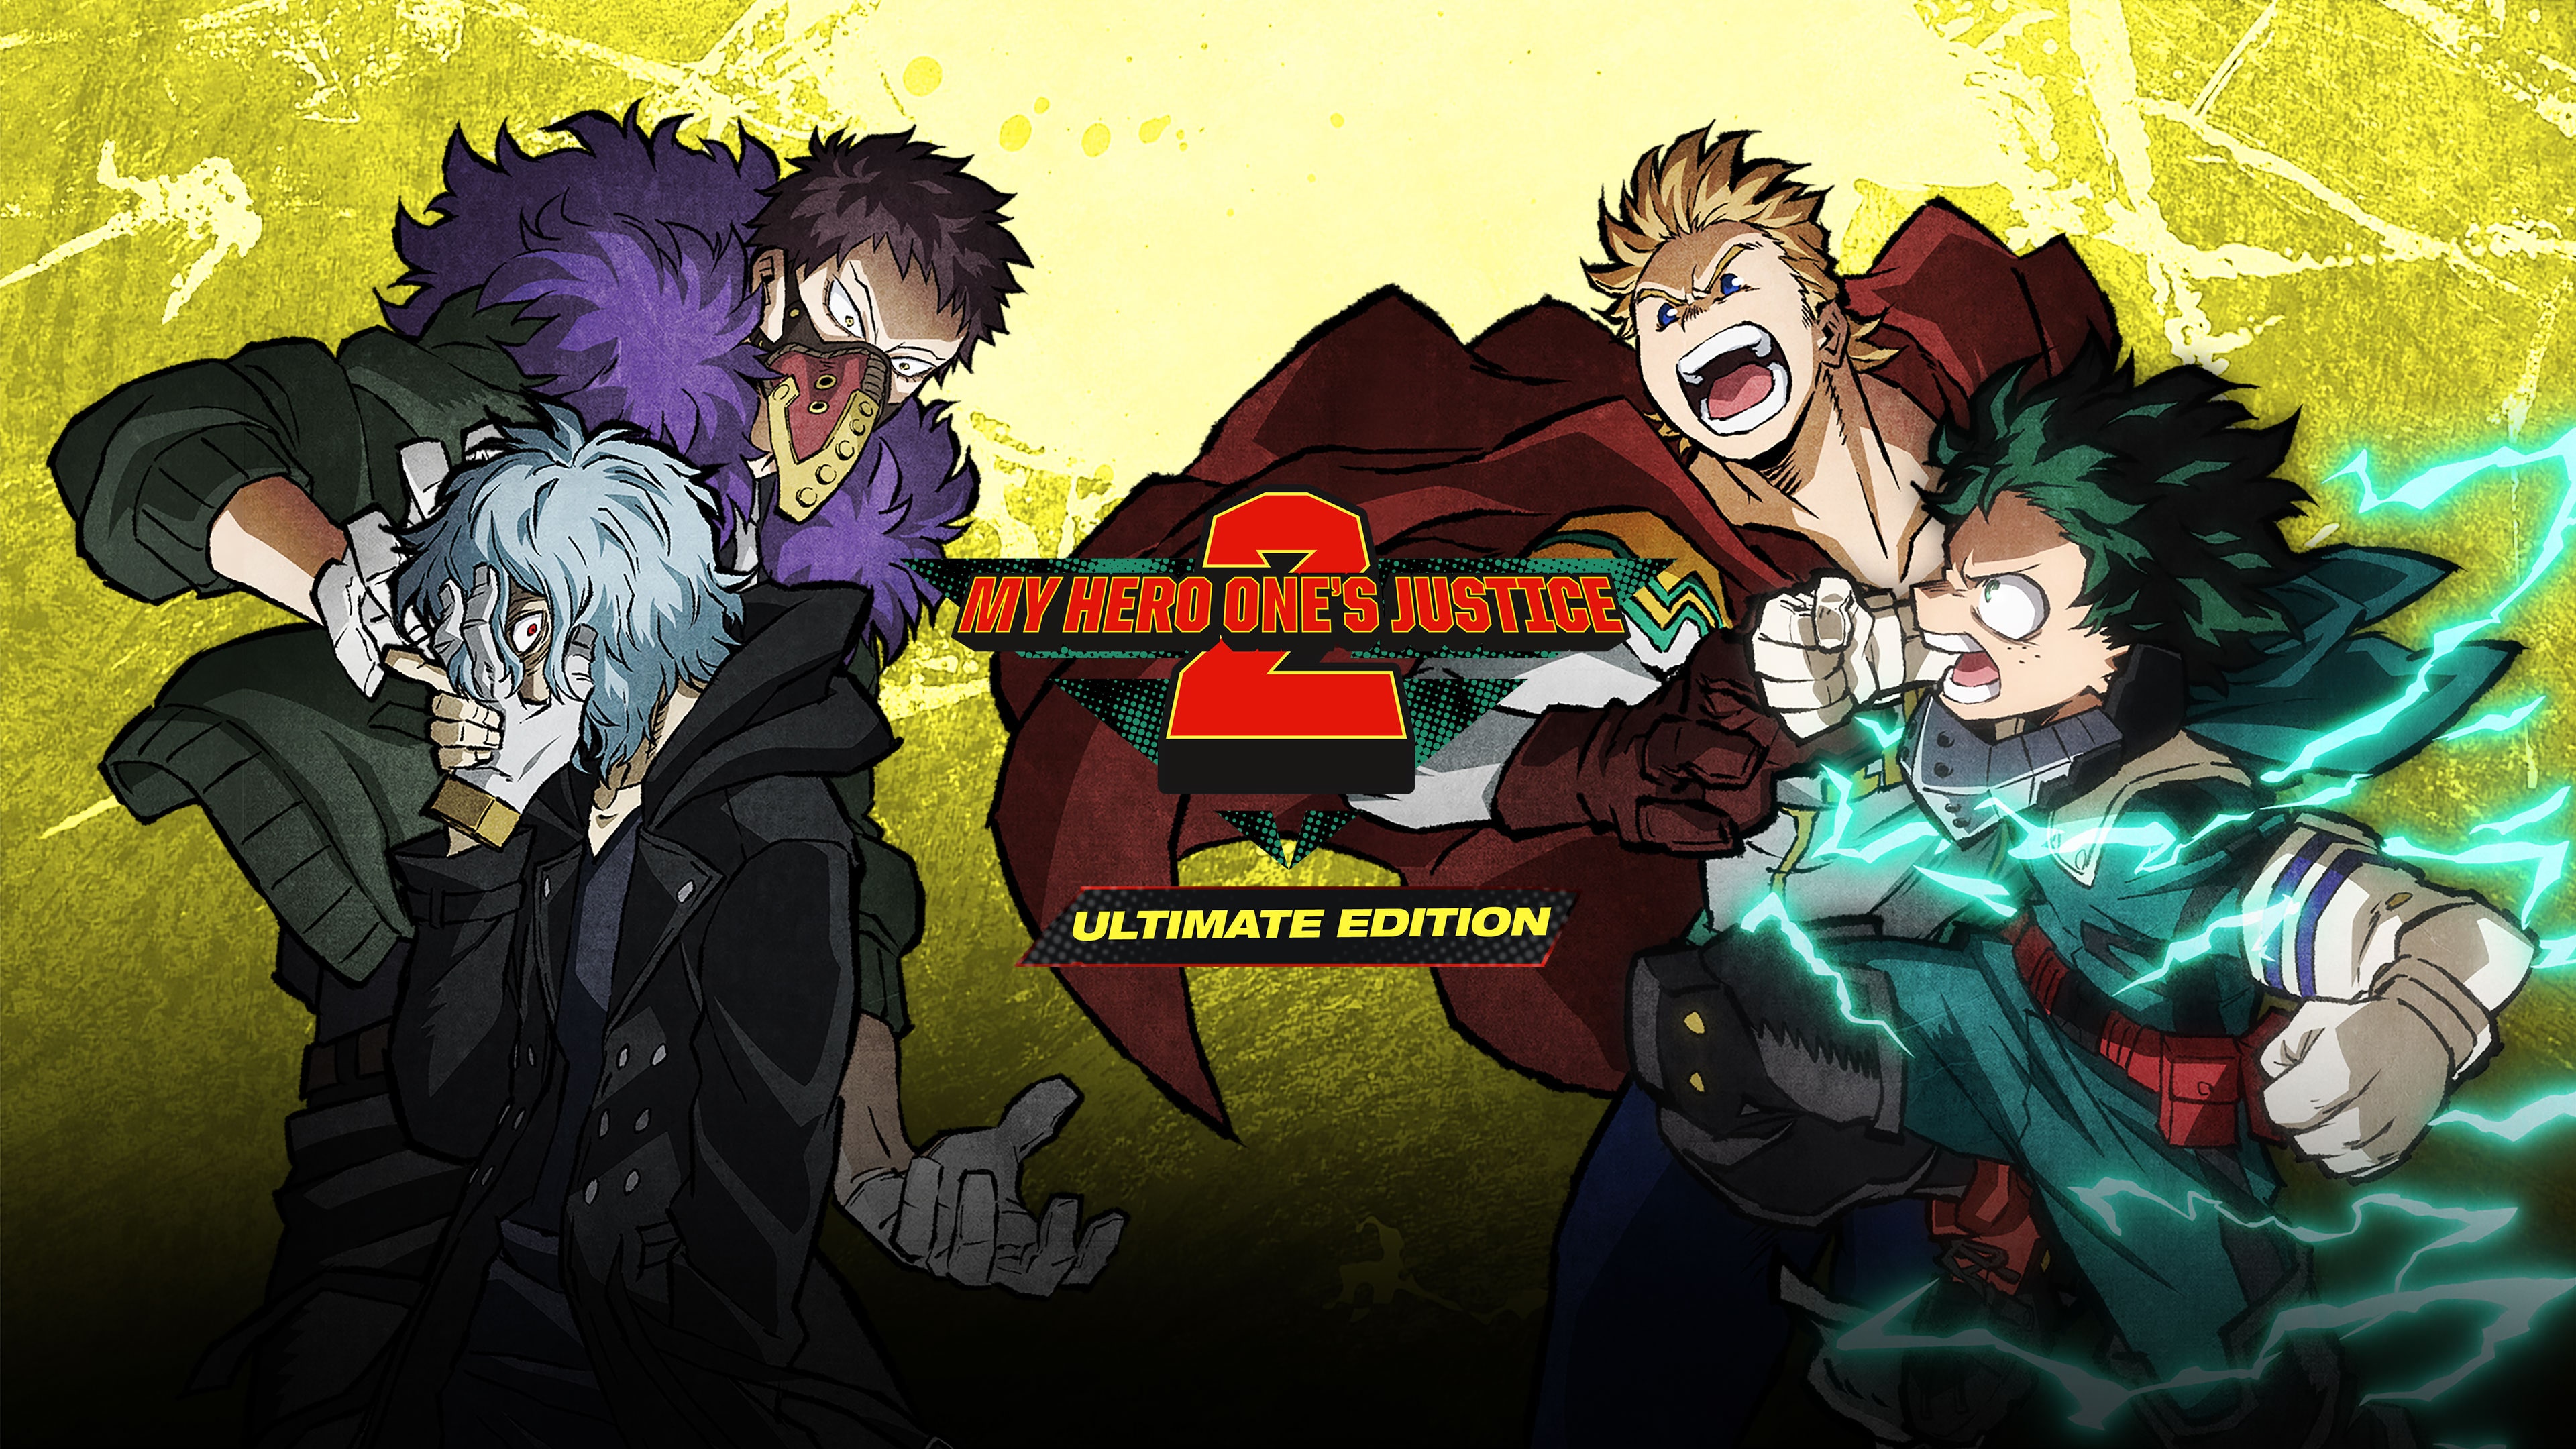 MY HERO ONE'S JUSTICE 2 Ultimate Edition (English)